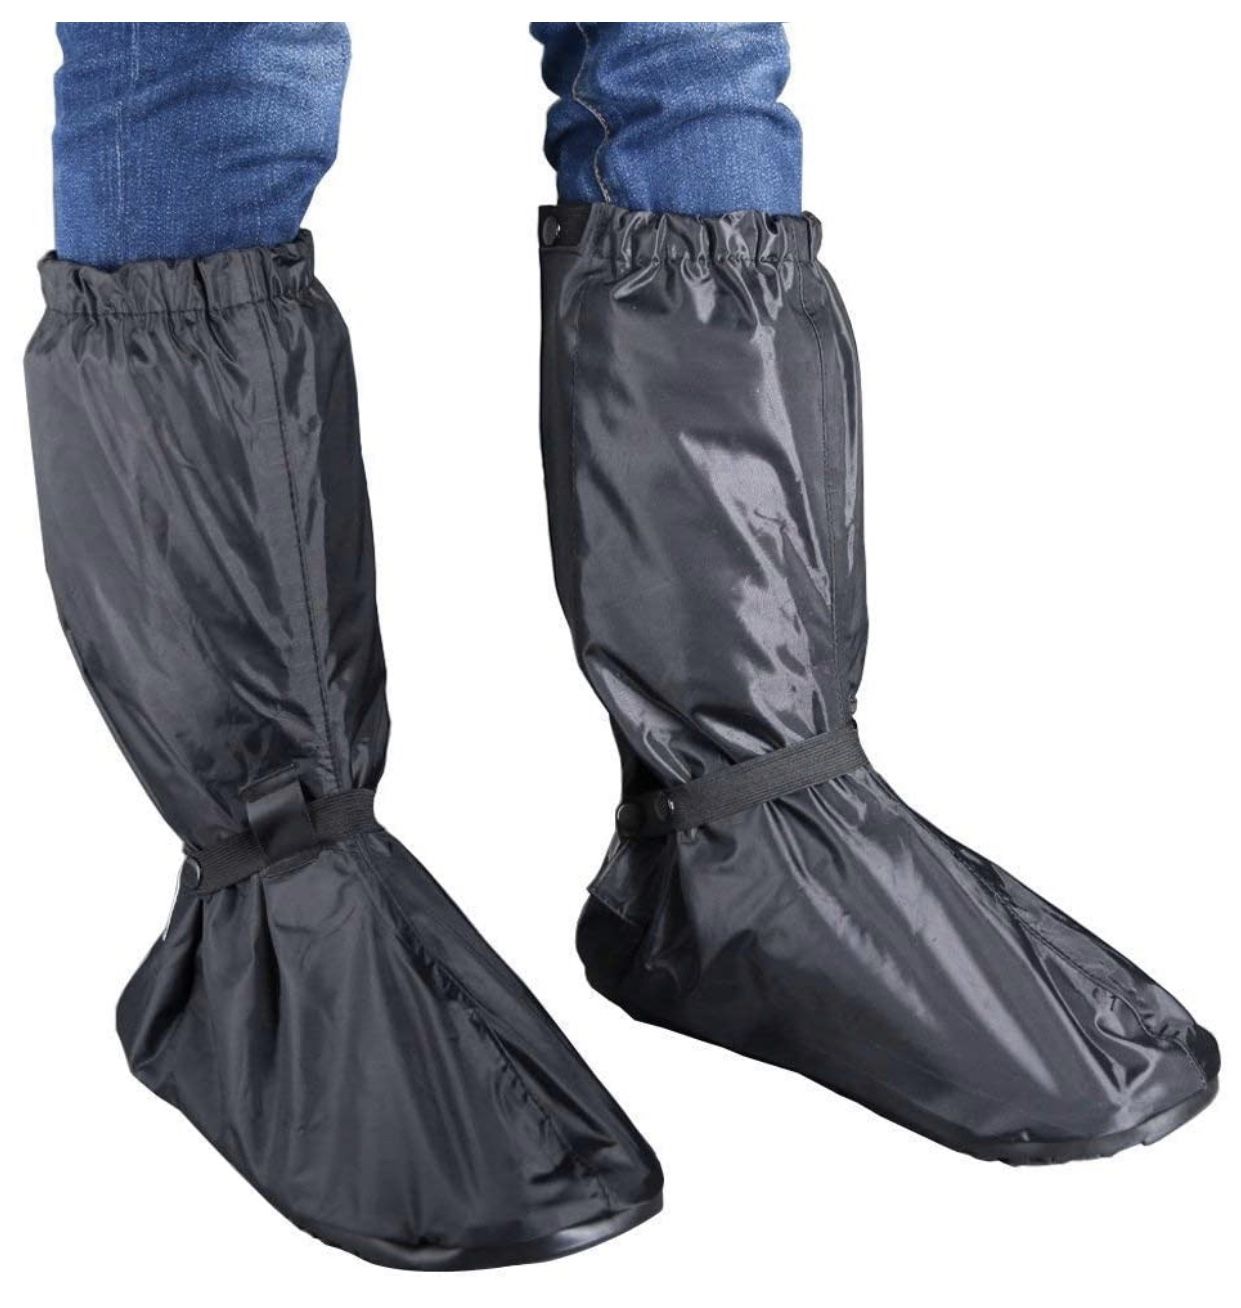 Water rain boots foldable women can wear it with shoes